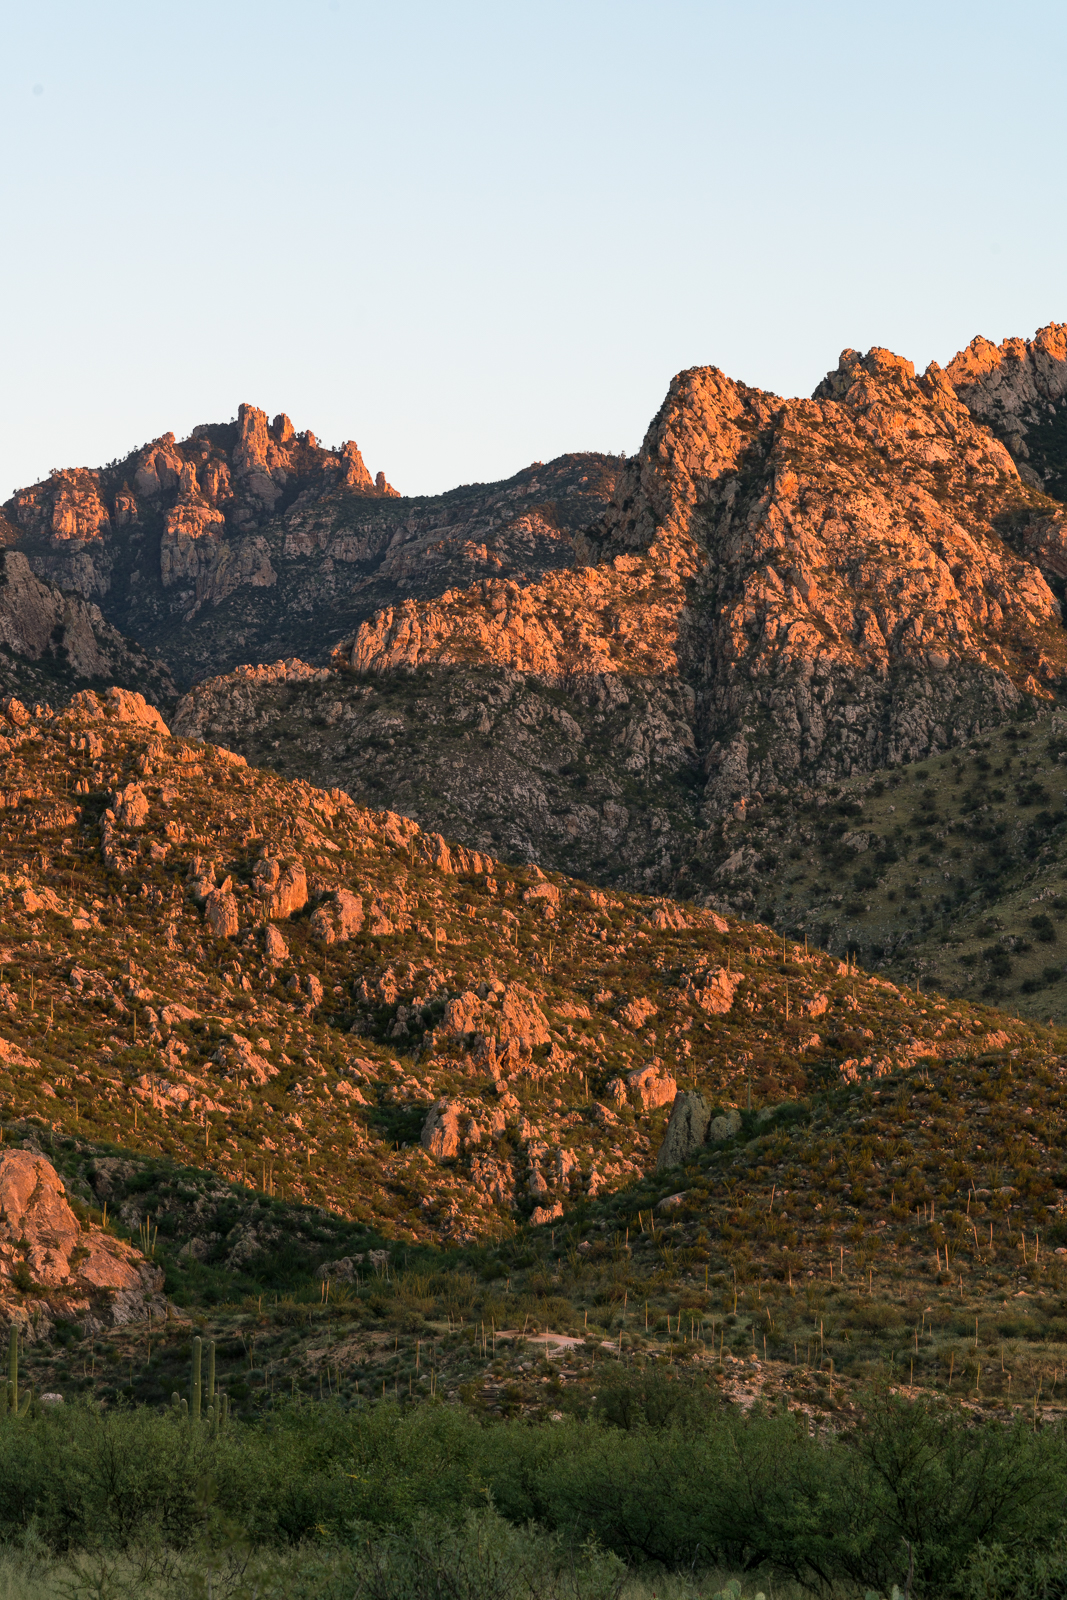 Sunset from the Sutherland Trail in Catalina State Park. August 2016.